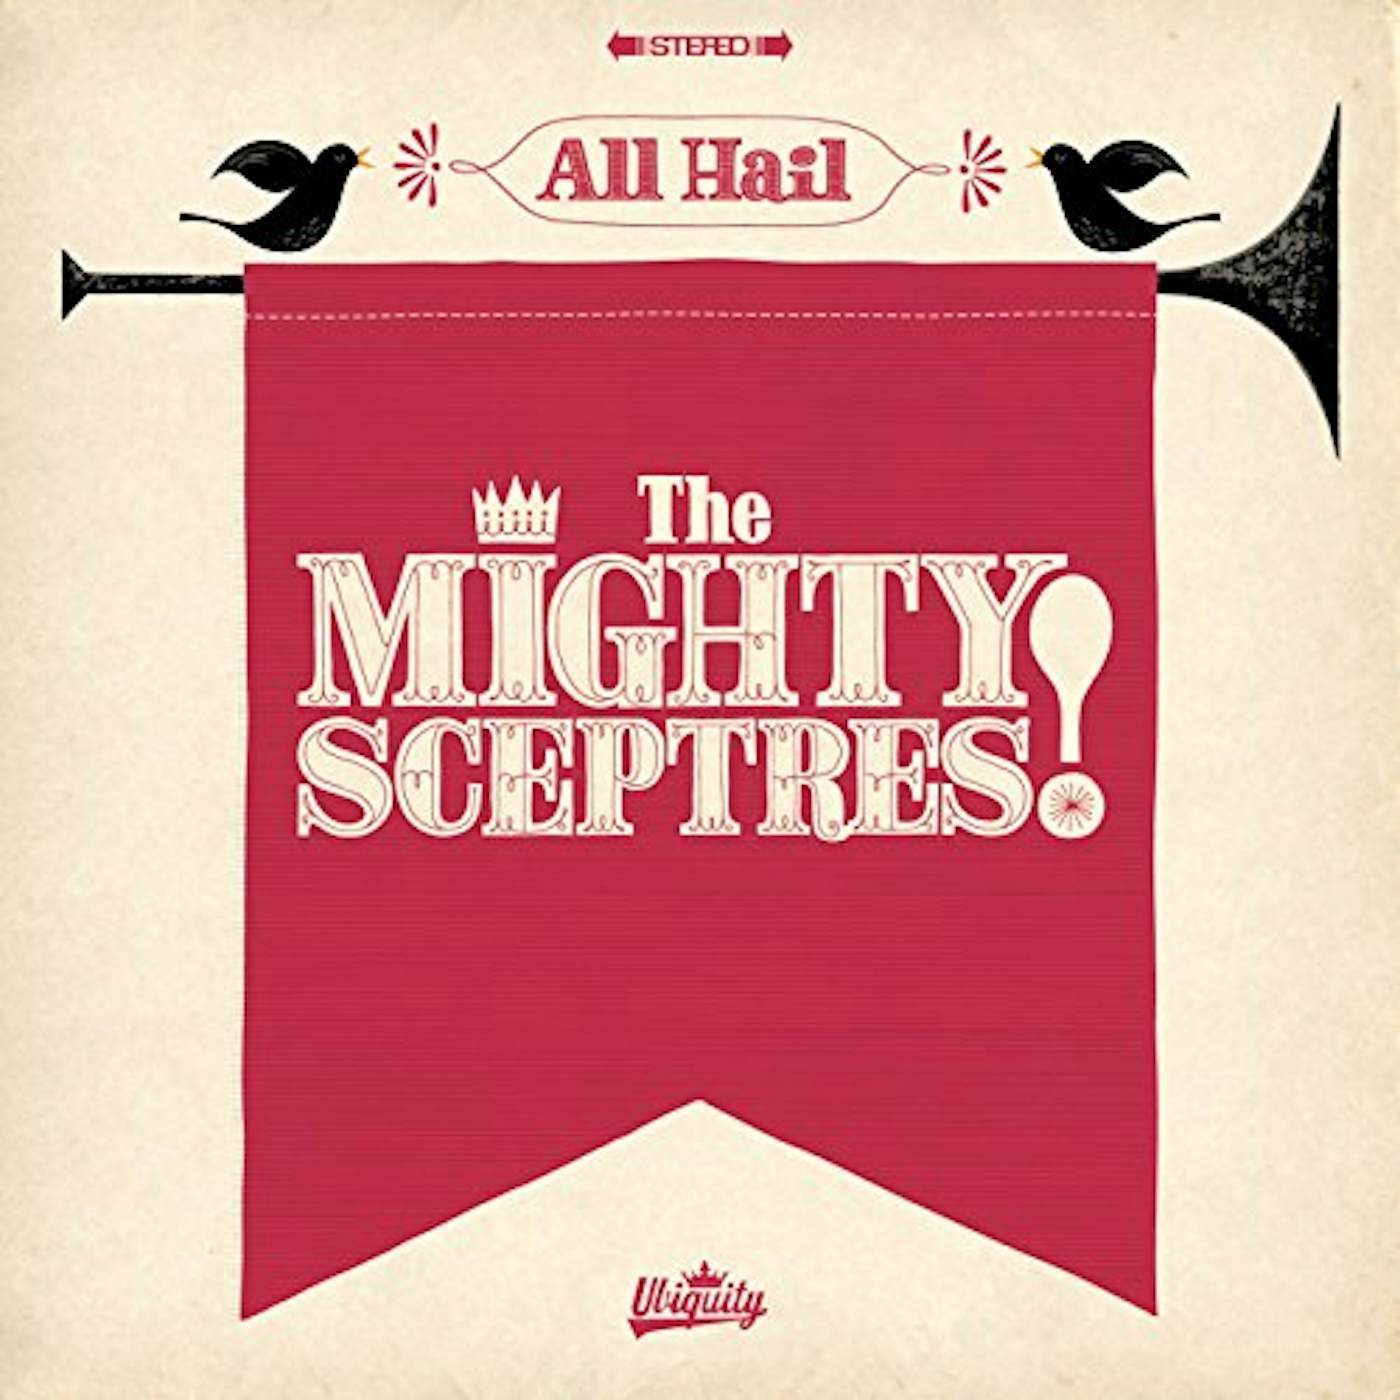 ALL HAIL THE MIGHTY SCEPTRES CD